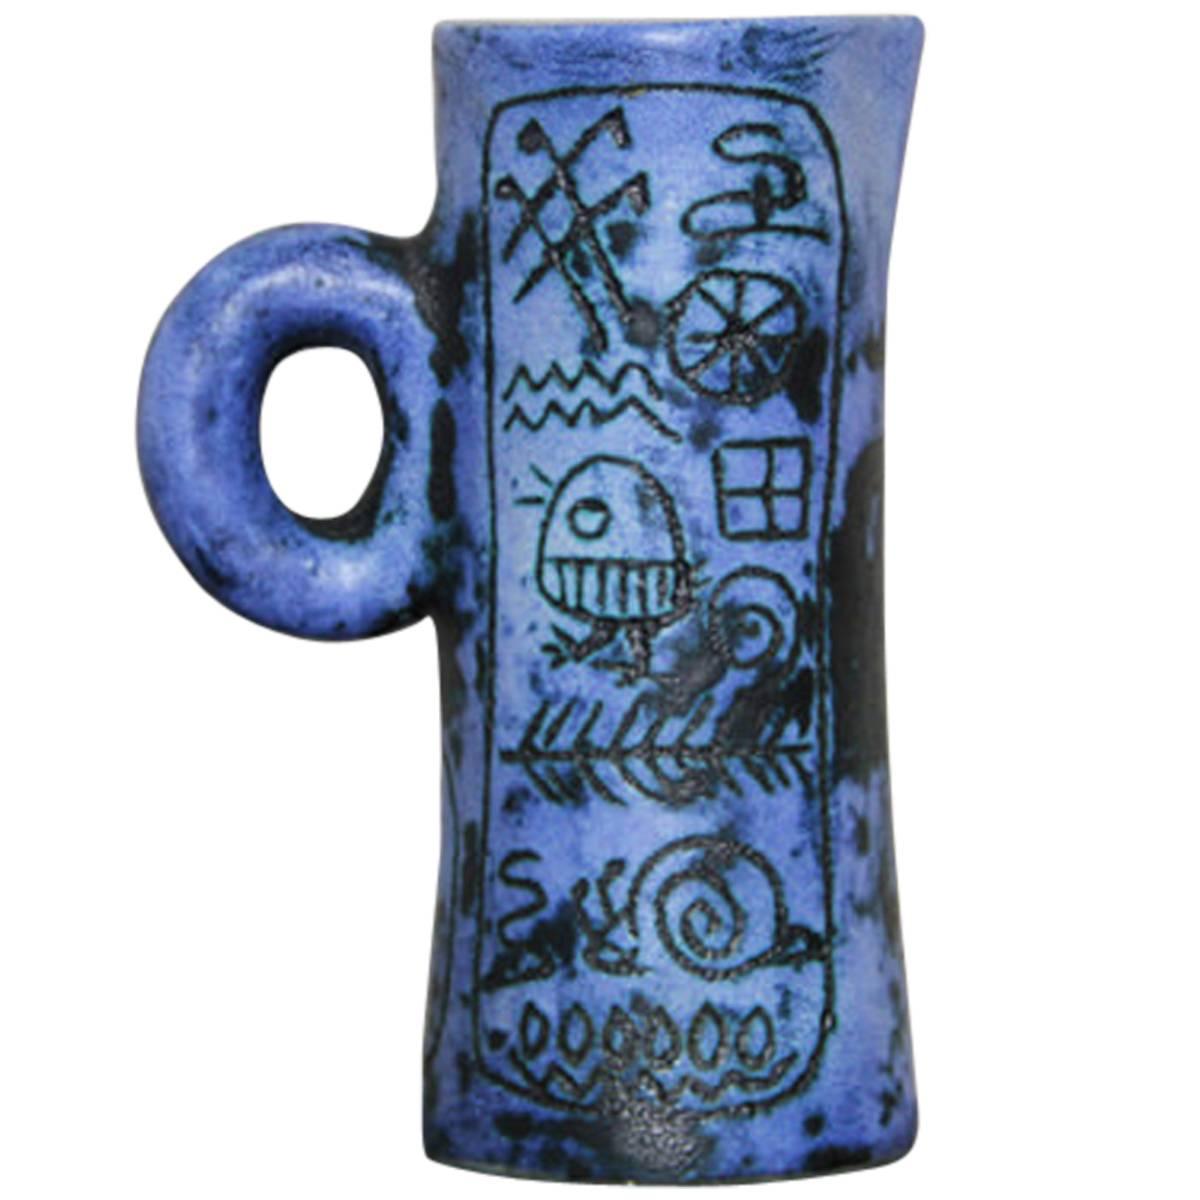 Blue Ceramic Sgraffito Pitcher by Jacques Blin, 1950s For Sale